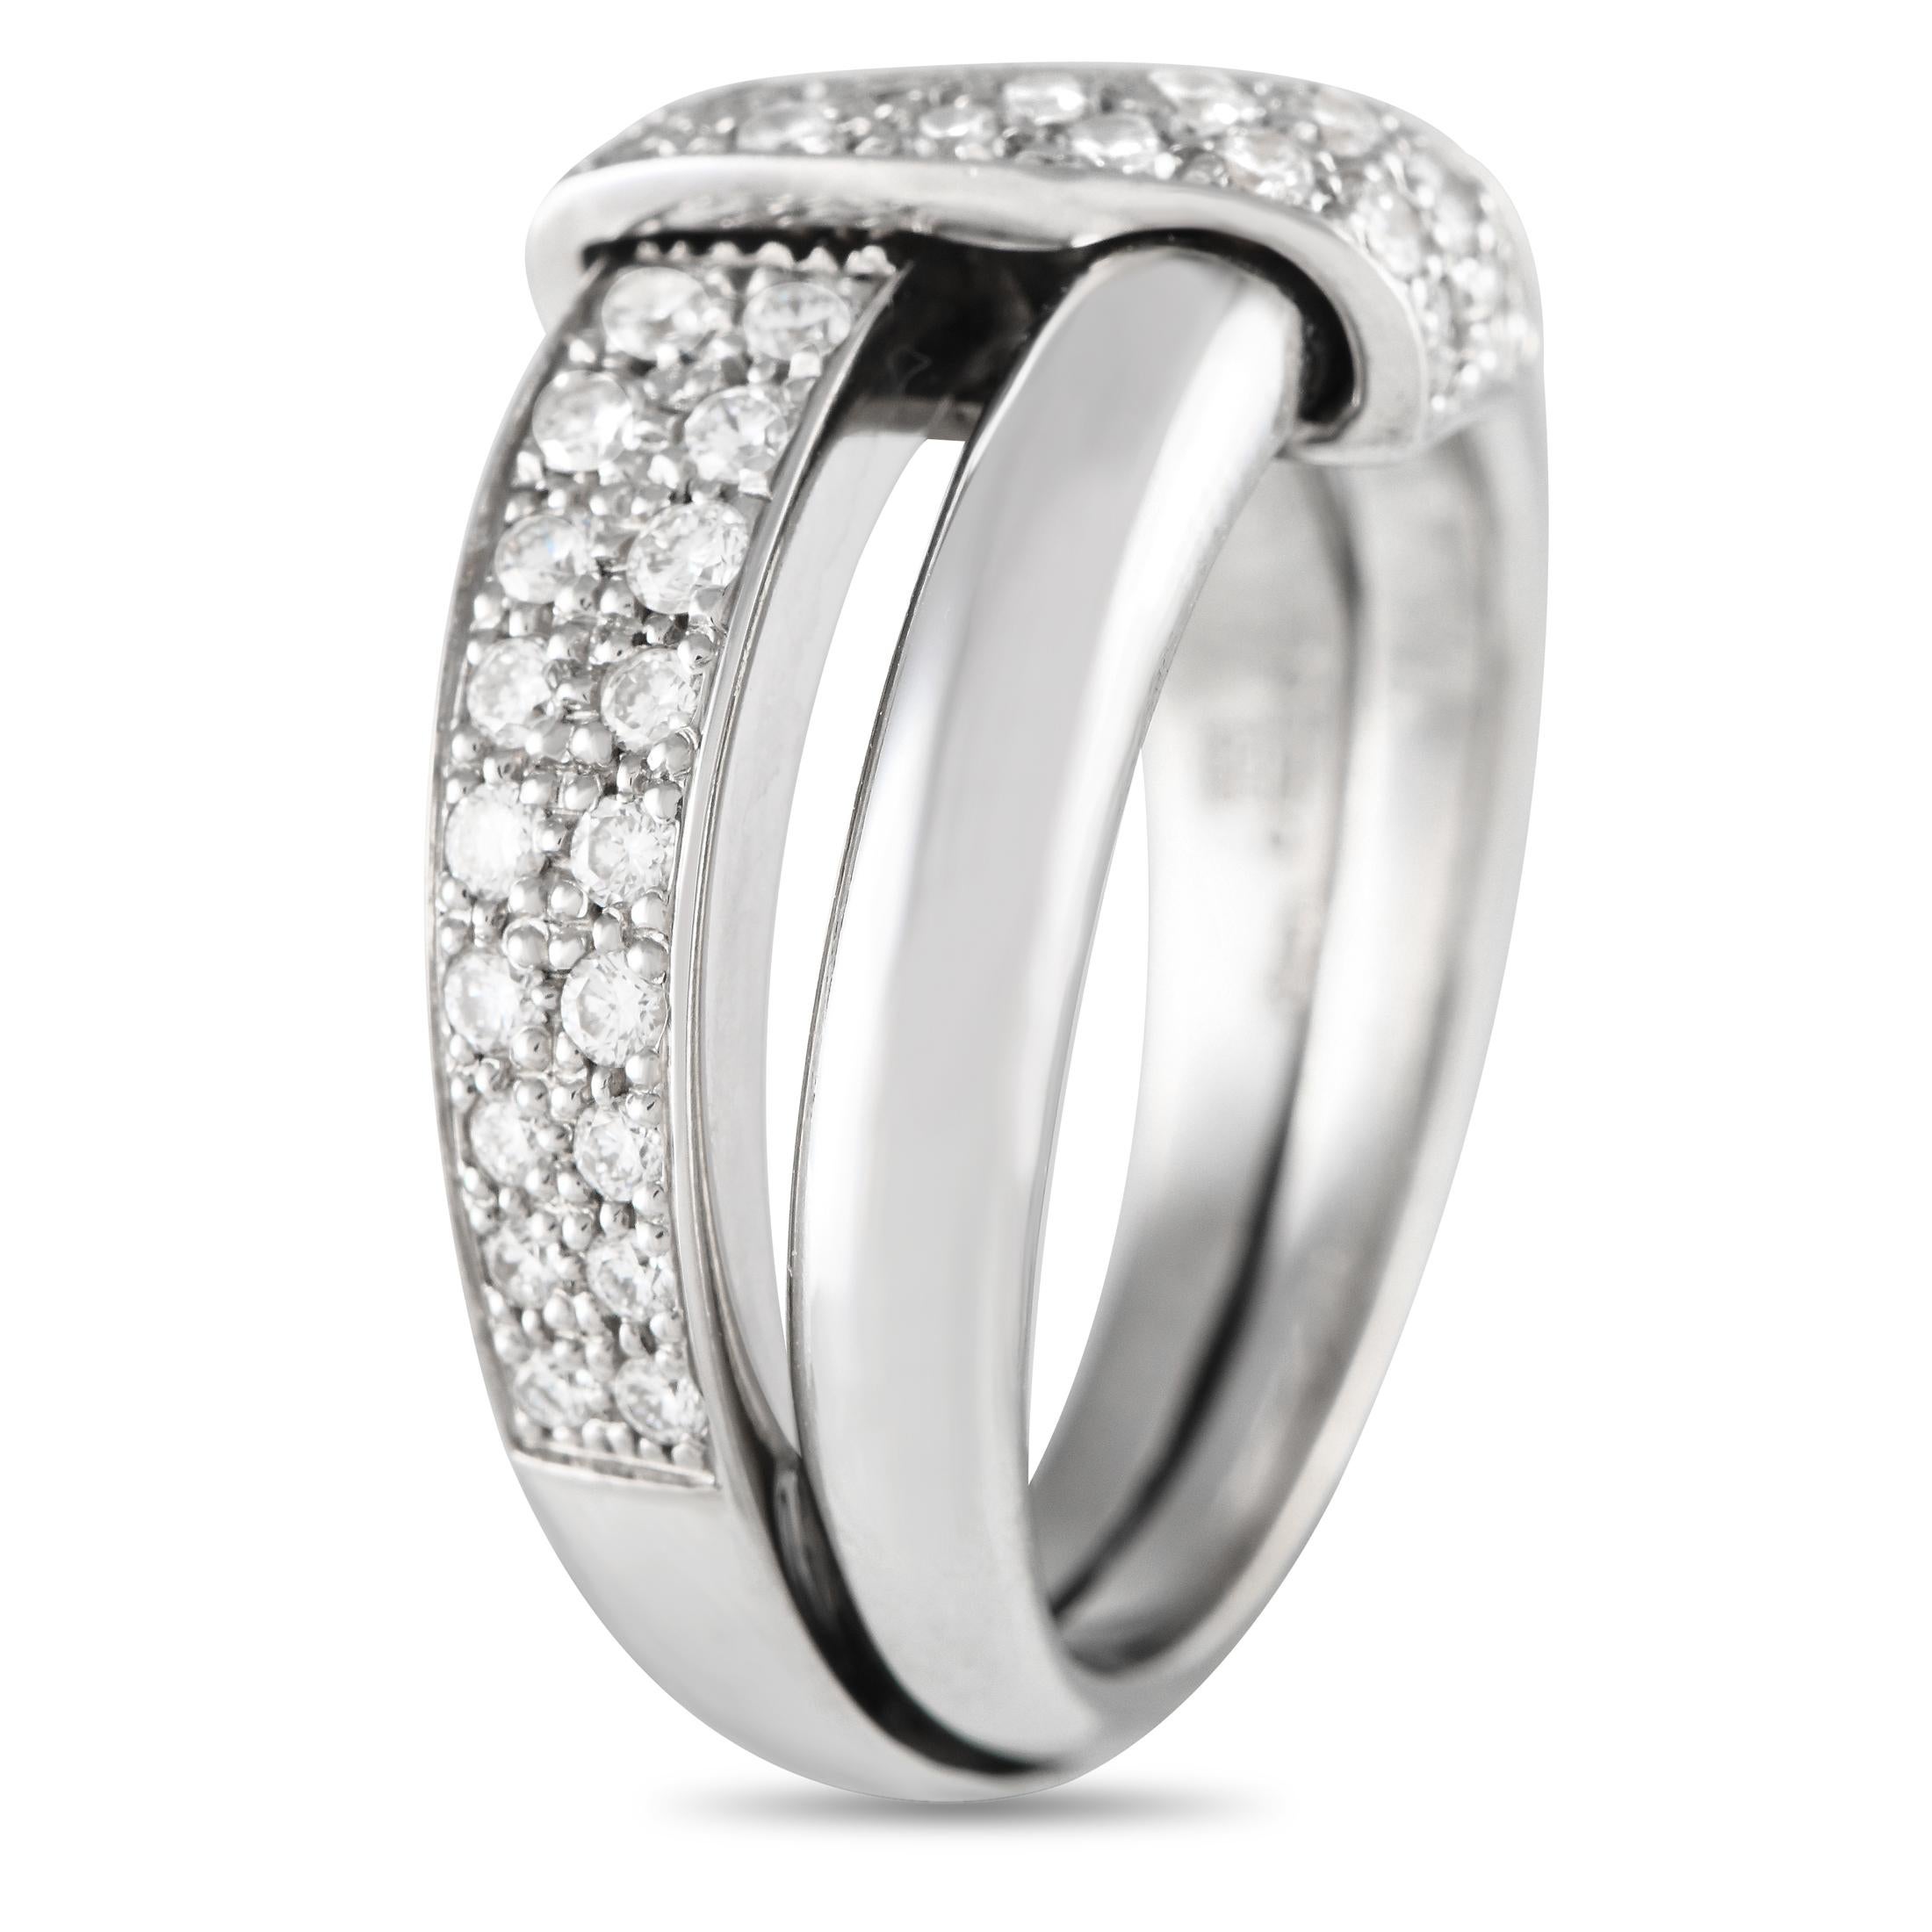 A sleek 18K White Gold setting with a stylish wrapped accent makes this Asprey ring a uniquely elegant piece will continually impress. Inset Diamonds with a total weight of 0.65 carats add visual impact to this impeccable accessory, which features a